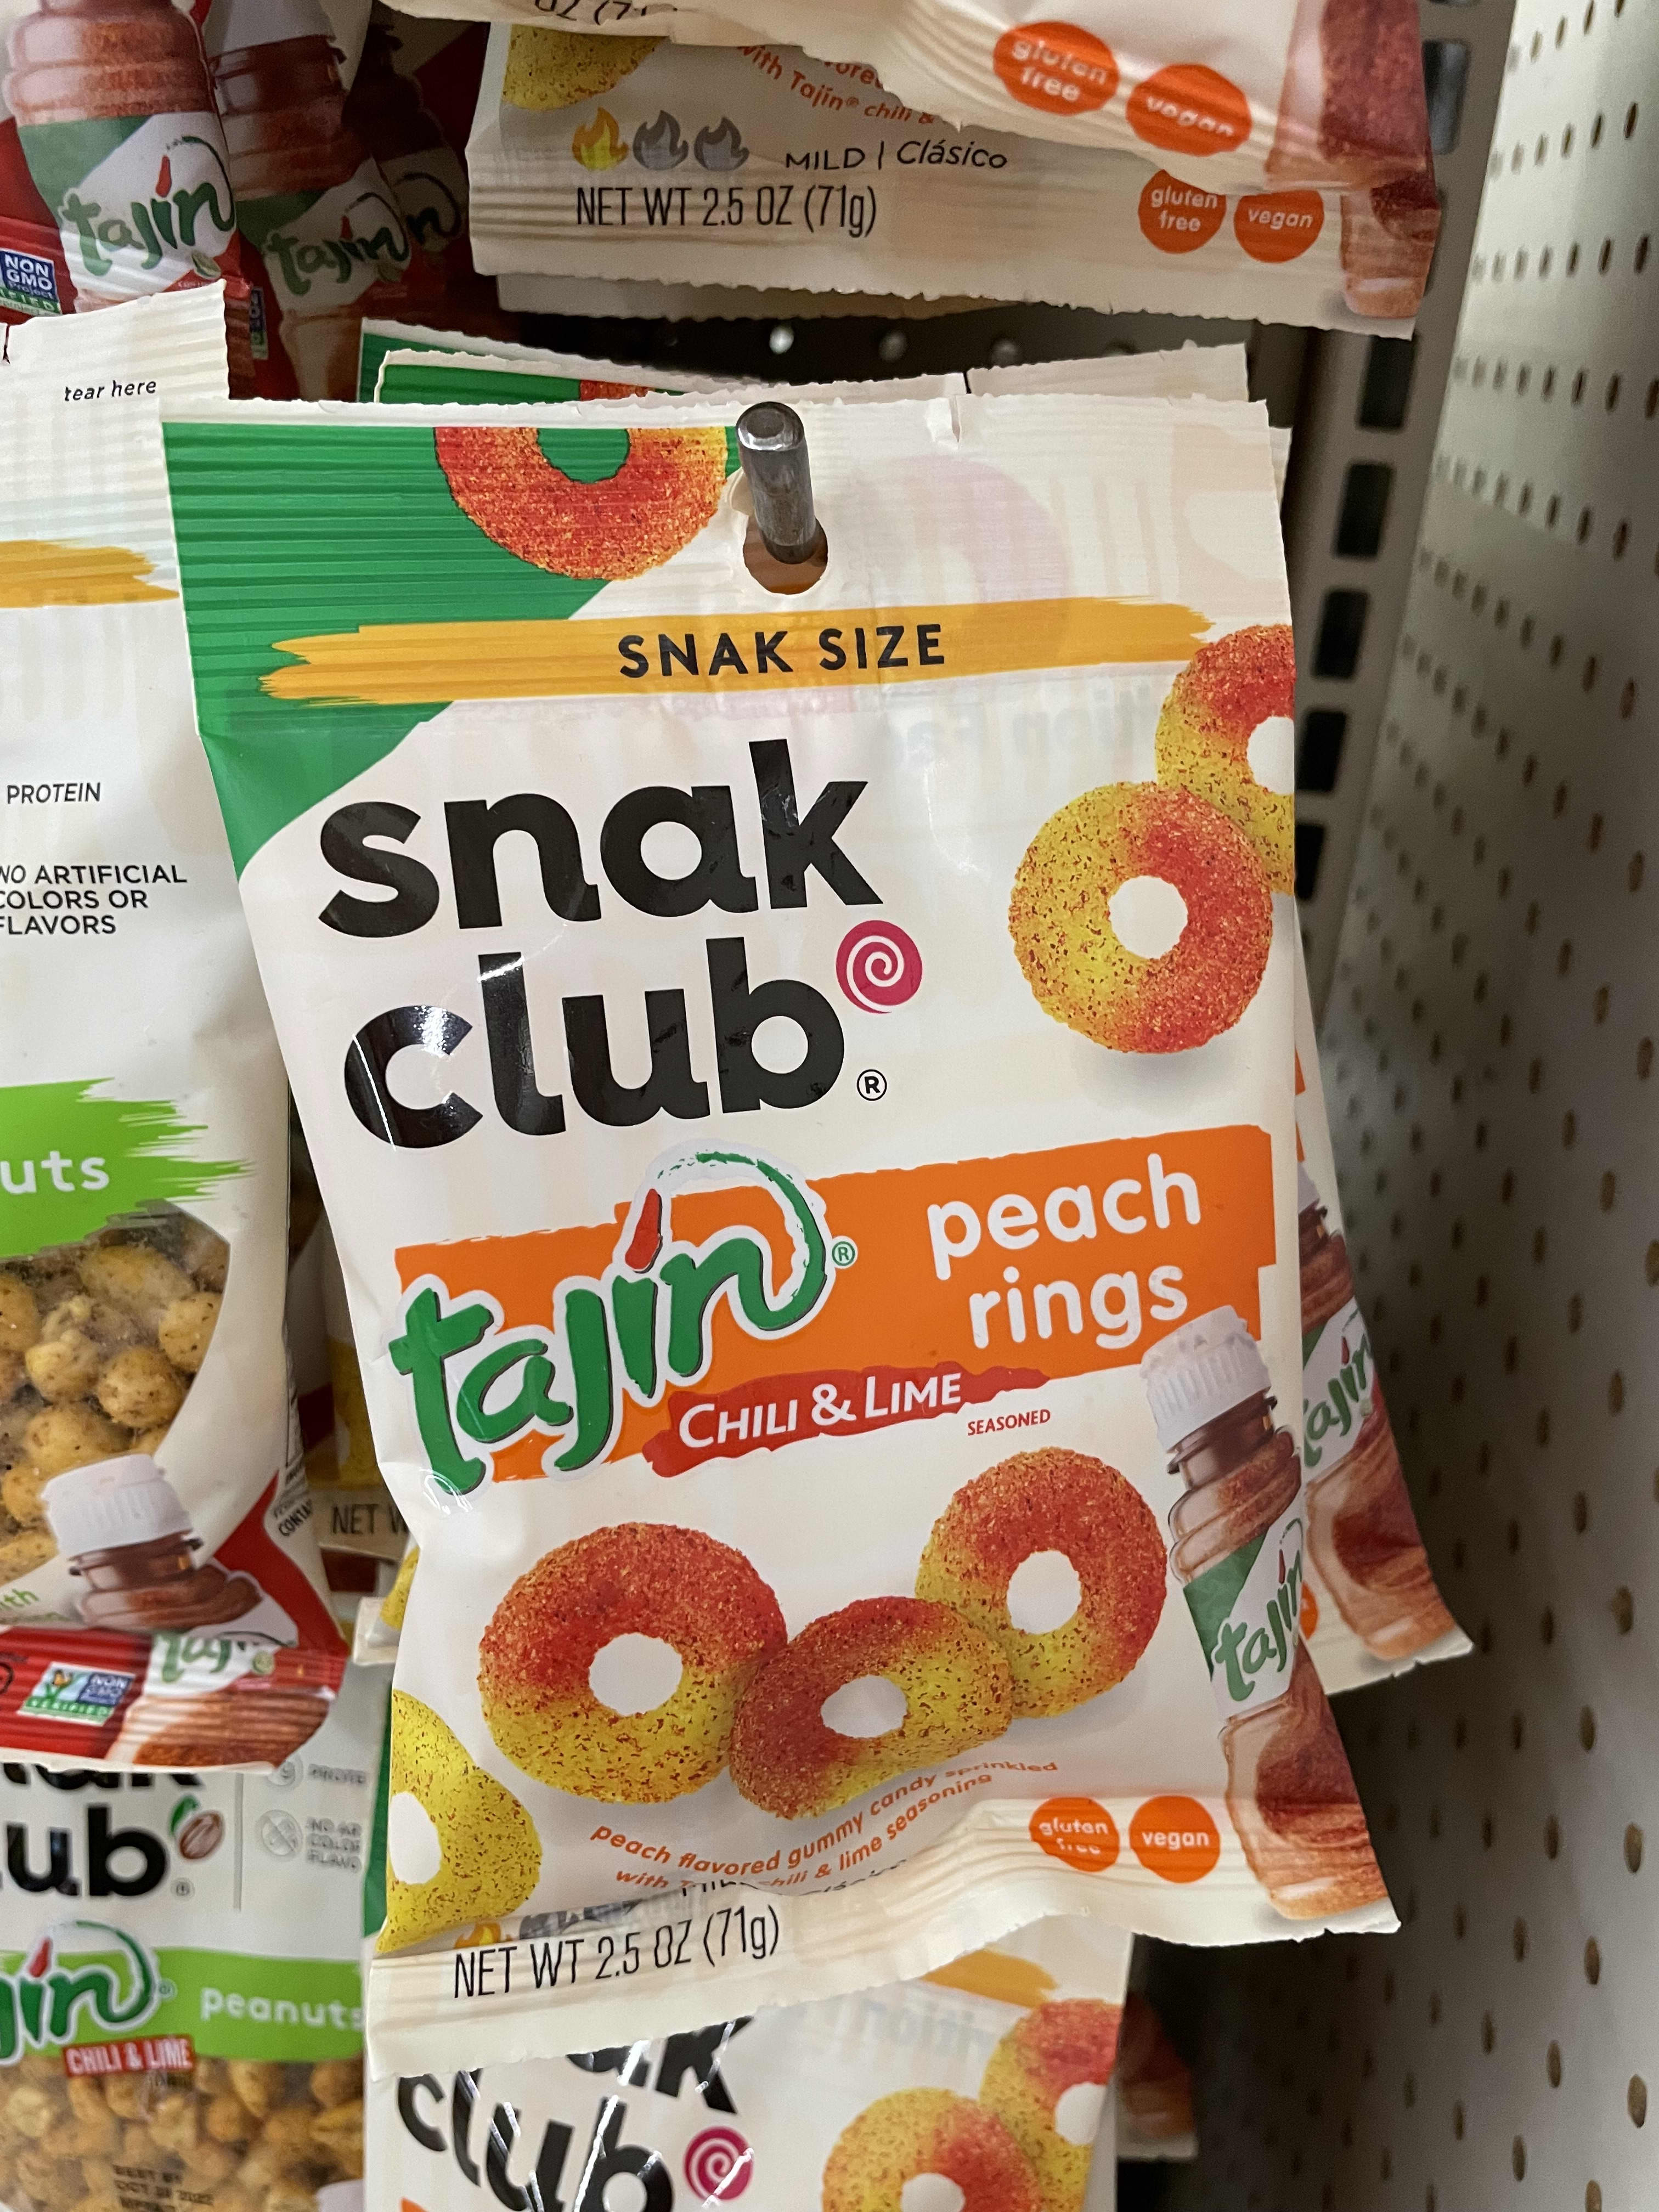 The Best Day Of The Week To Find 1-Cent Snack Deals At Dollar General